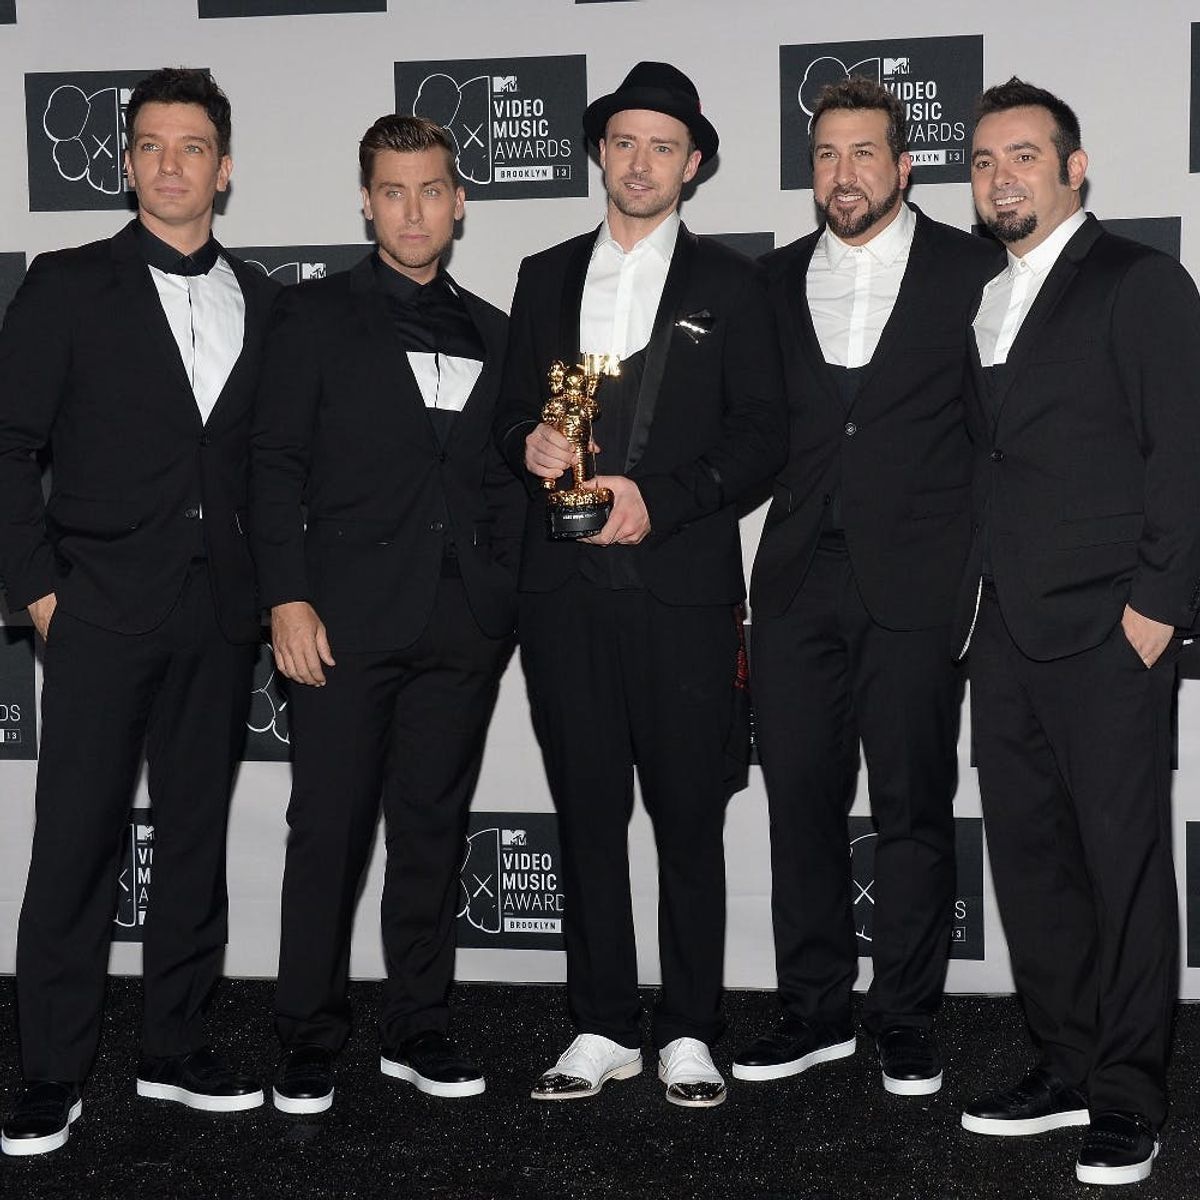 Justin Timberlake and *NSYNC Reunite for JC Chasez’s 40th Birthday